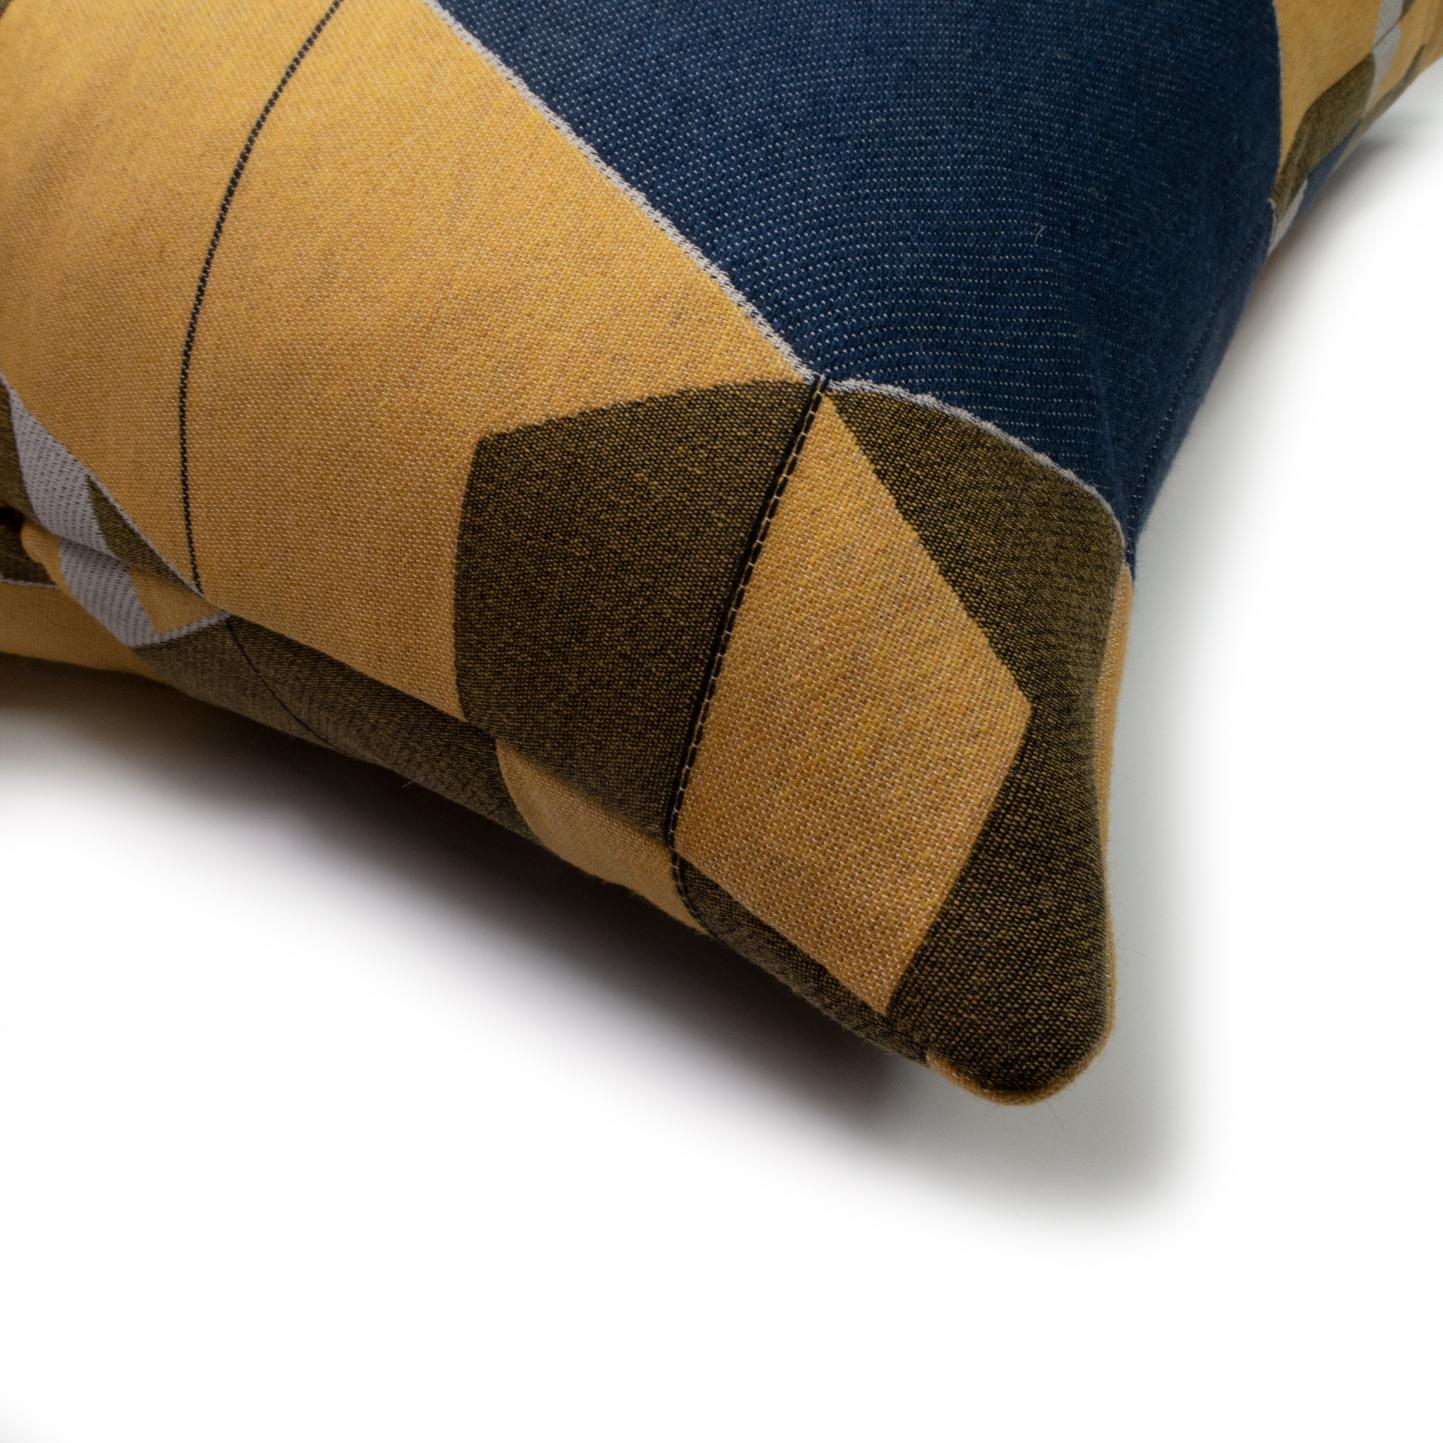 Belgian Cushion / Pattern Pillow Absolute Coup De Foudre Blue Yellow by Evolution21 For Sale